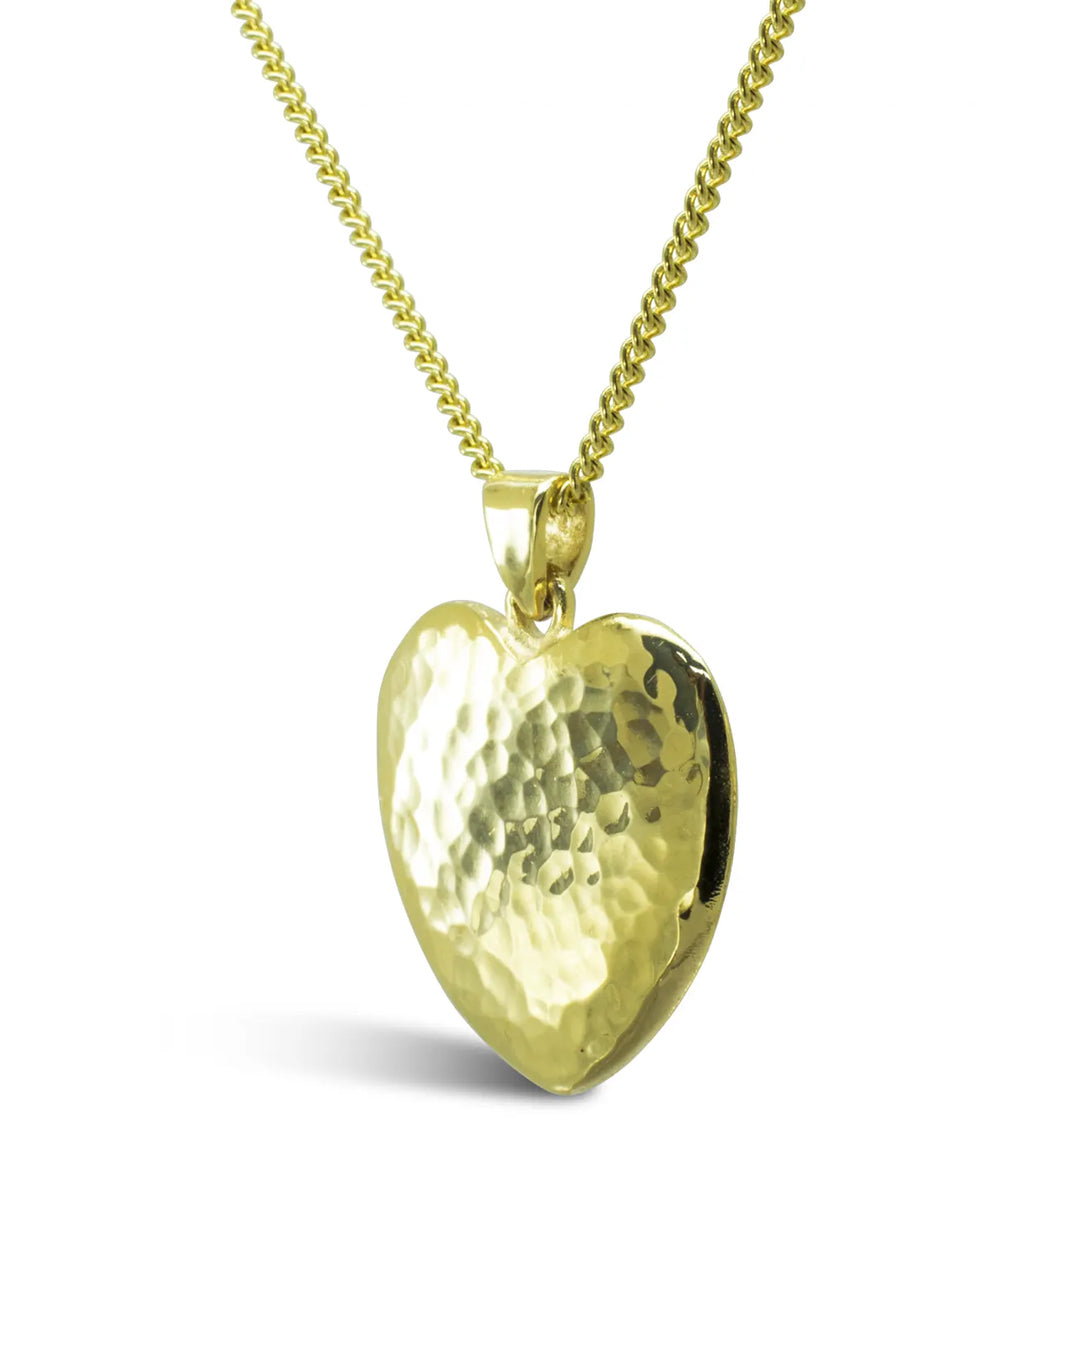 6Y4500 Pendant Heart 8x2x10 cm Gold colored Metal Heart-Shaped Home Decor